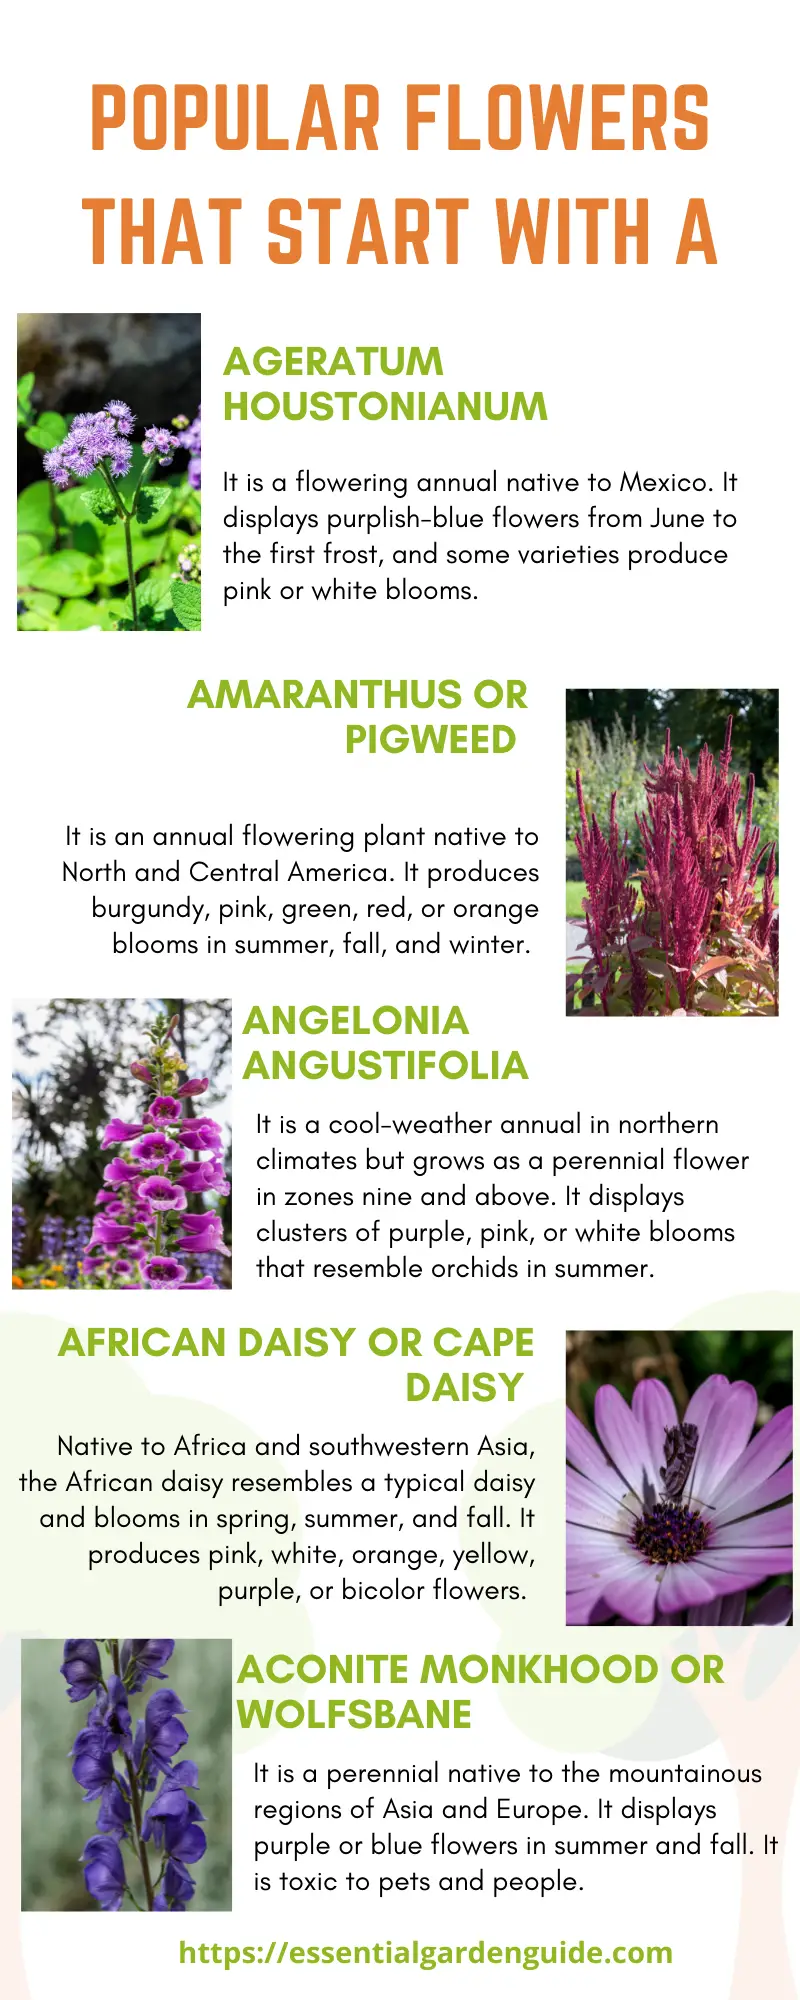 Infographic - 5 flowers starting with A Ageratum, Aconite, African Daisy, Angelonia Ameranthus,